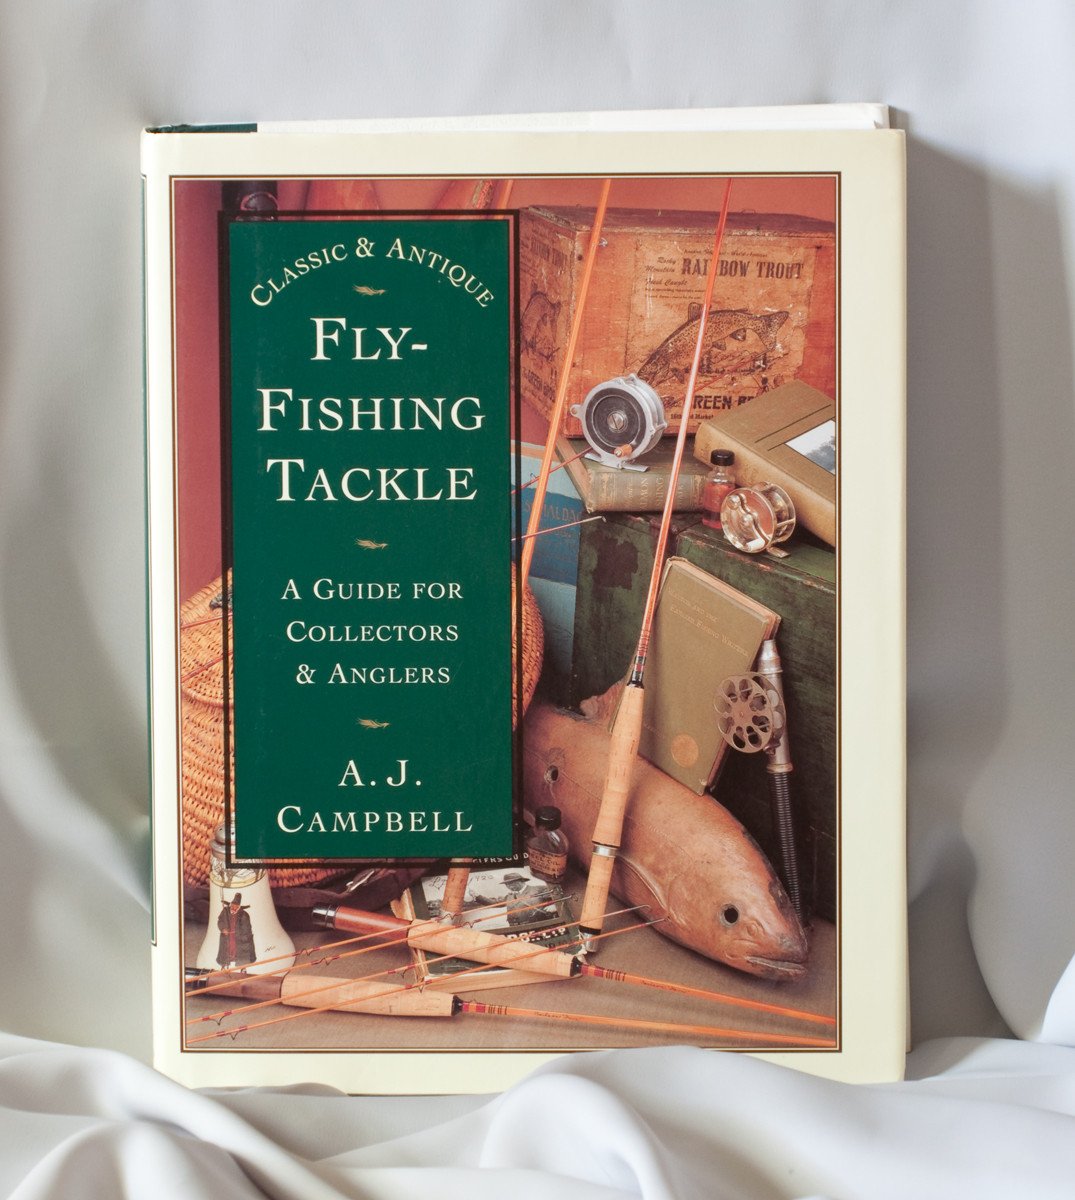 Campbell, A.J. - "Classic & Antique Fly-Fishing Tackle"